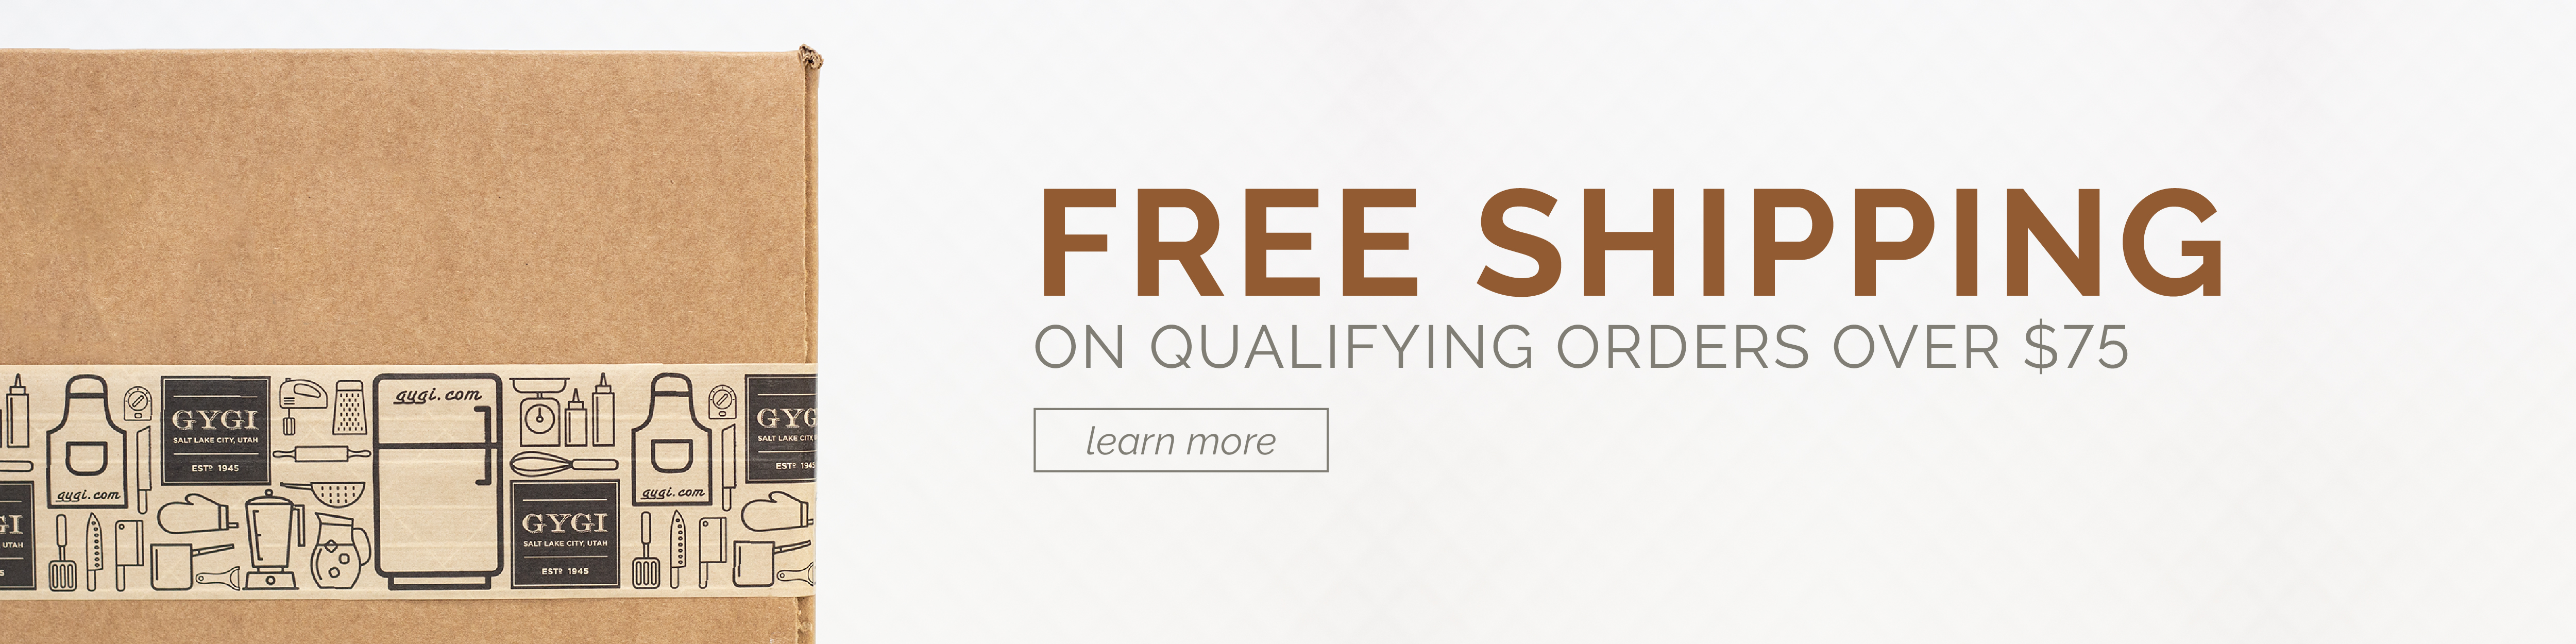 Free Shipping on qualifying orders over $75. Click here to learn more.